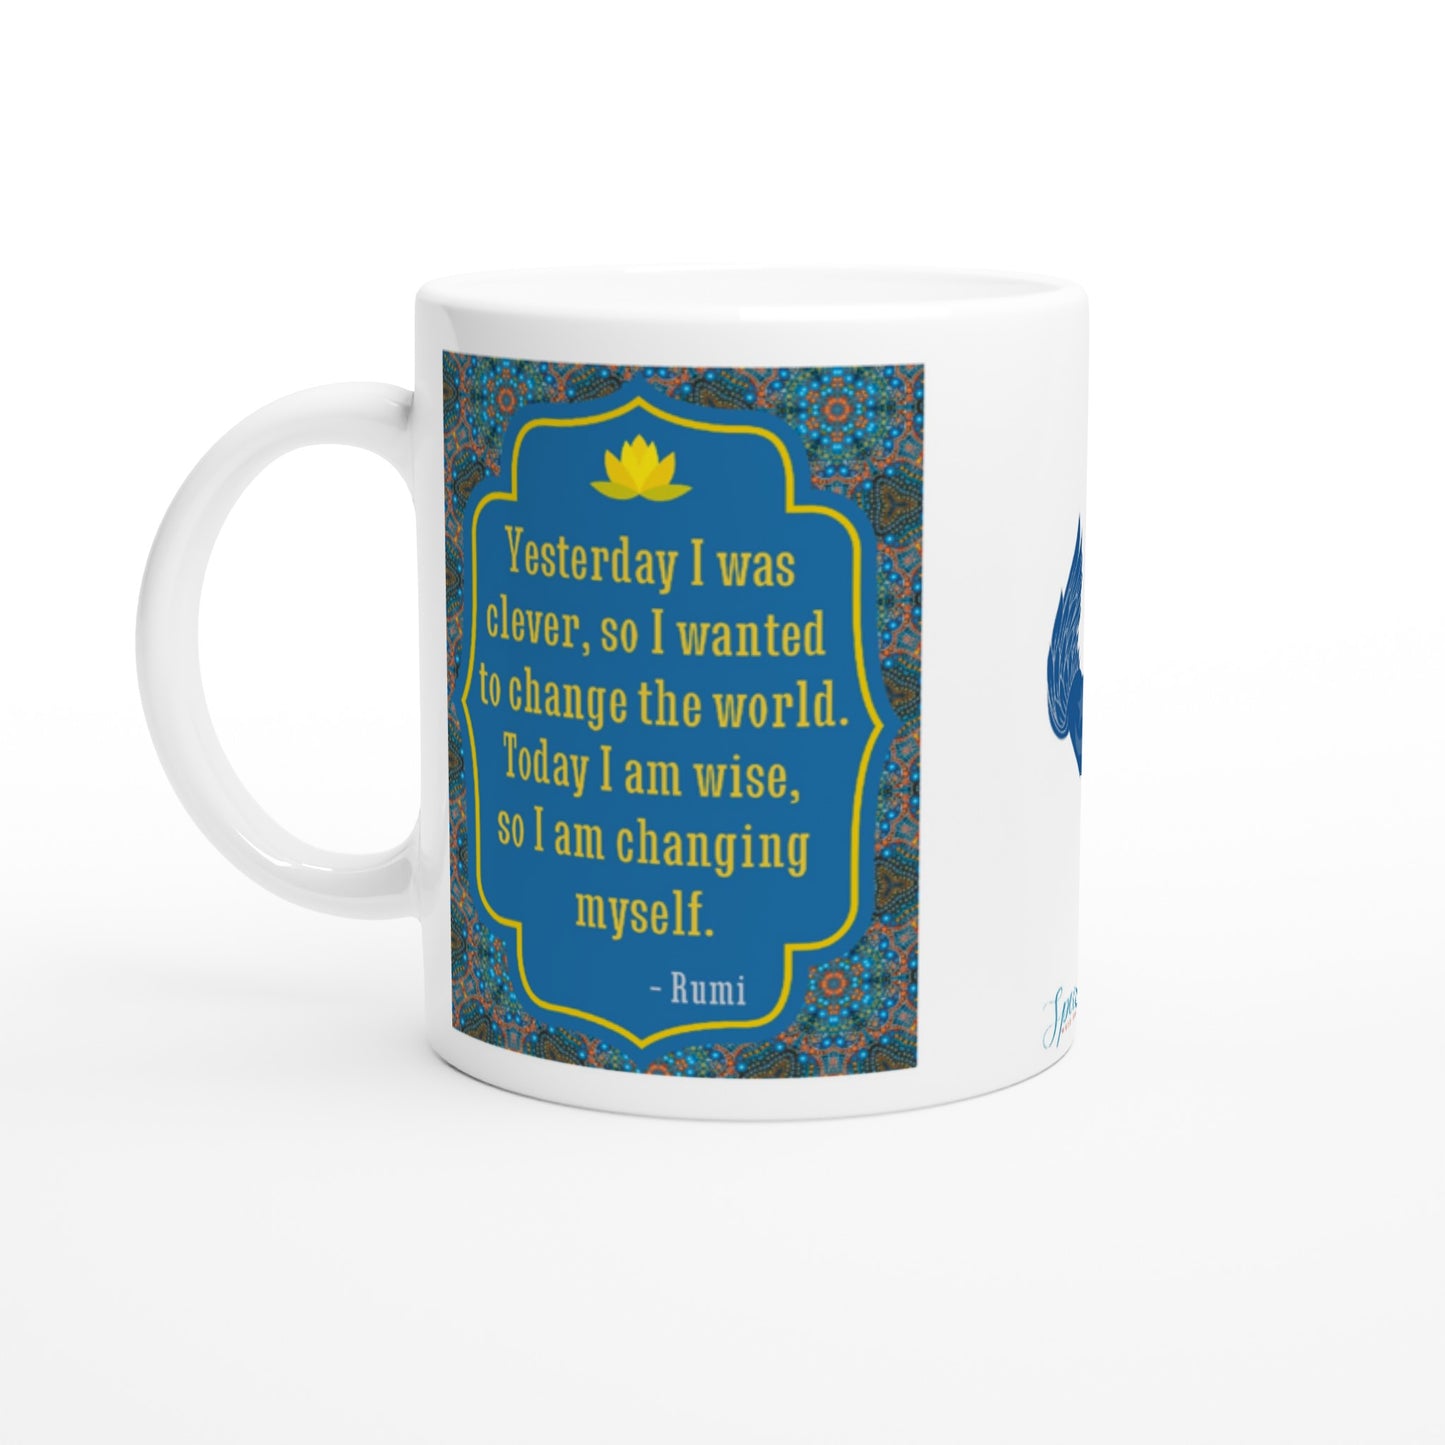 Rumi "Today I am wise" 11 oz. Mug front view